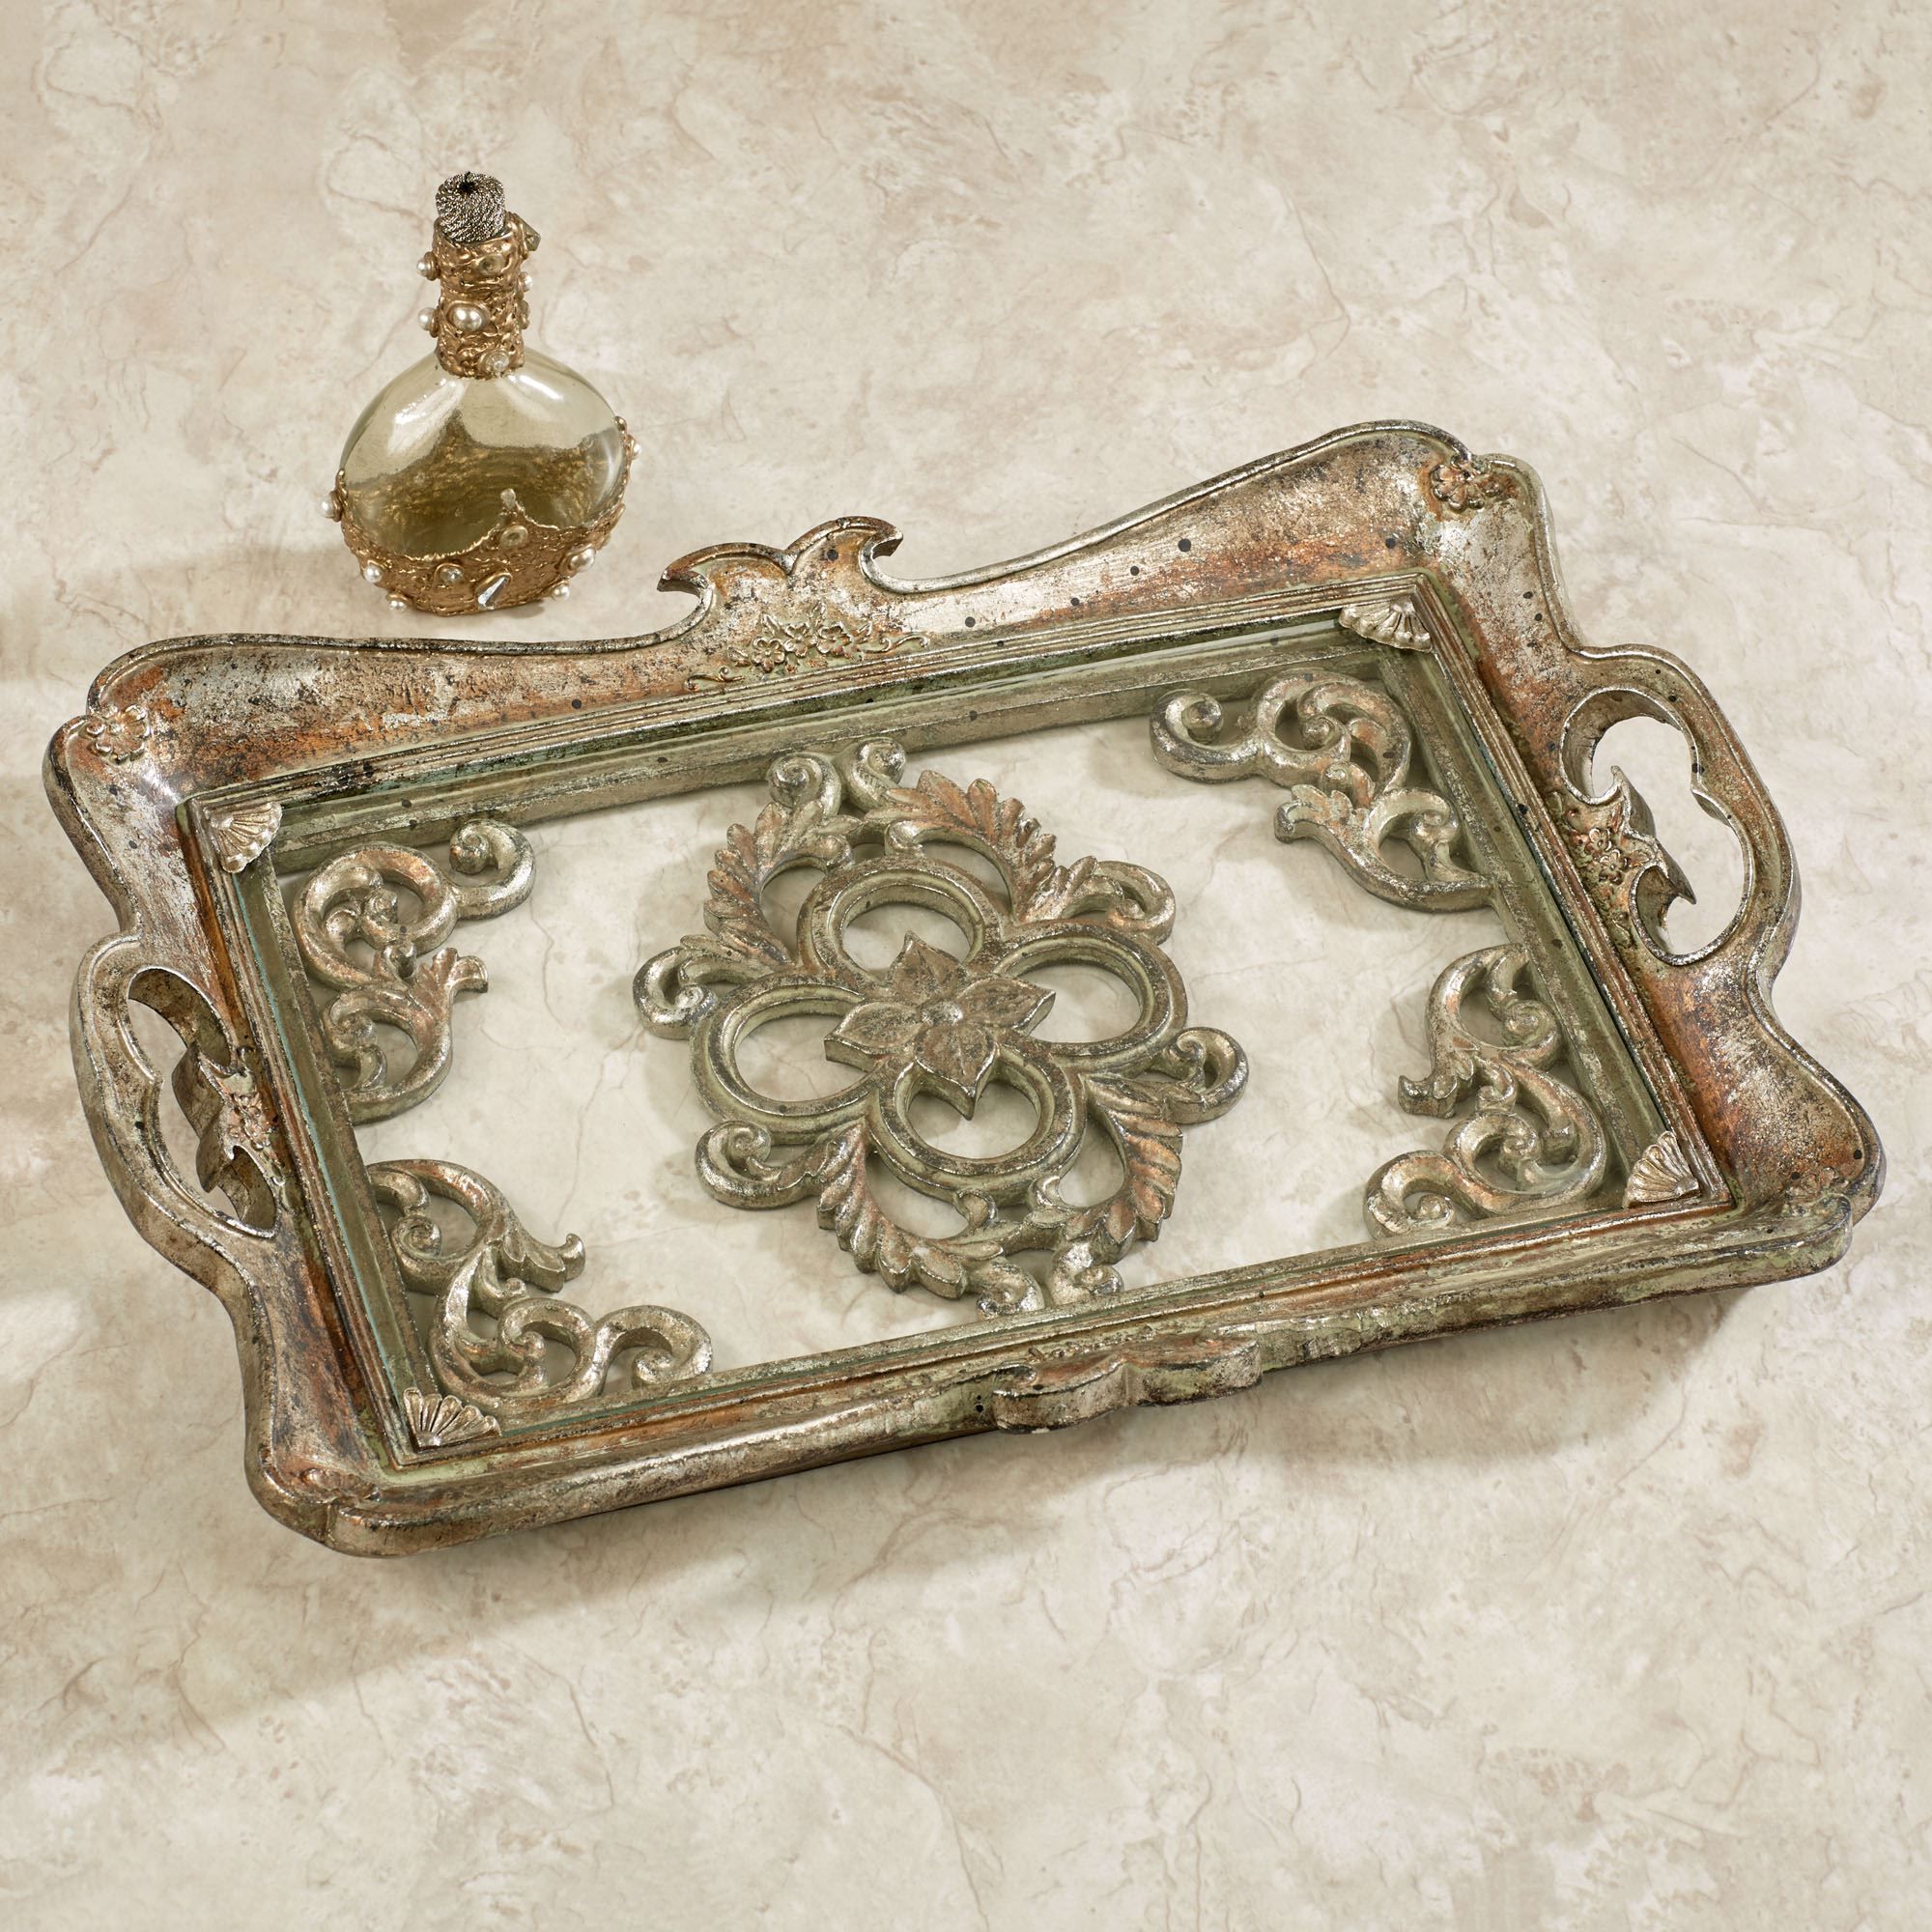 Bethney Glass Vanity Tray Within 2019 Aged Silver Vanity Mirrors (View 15 of 15)